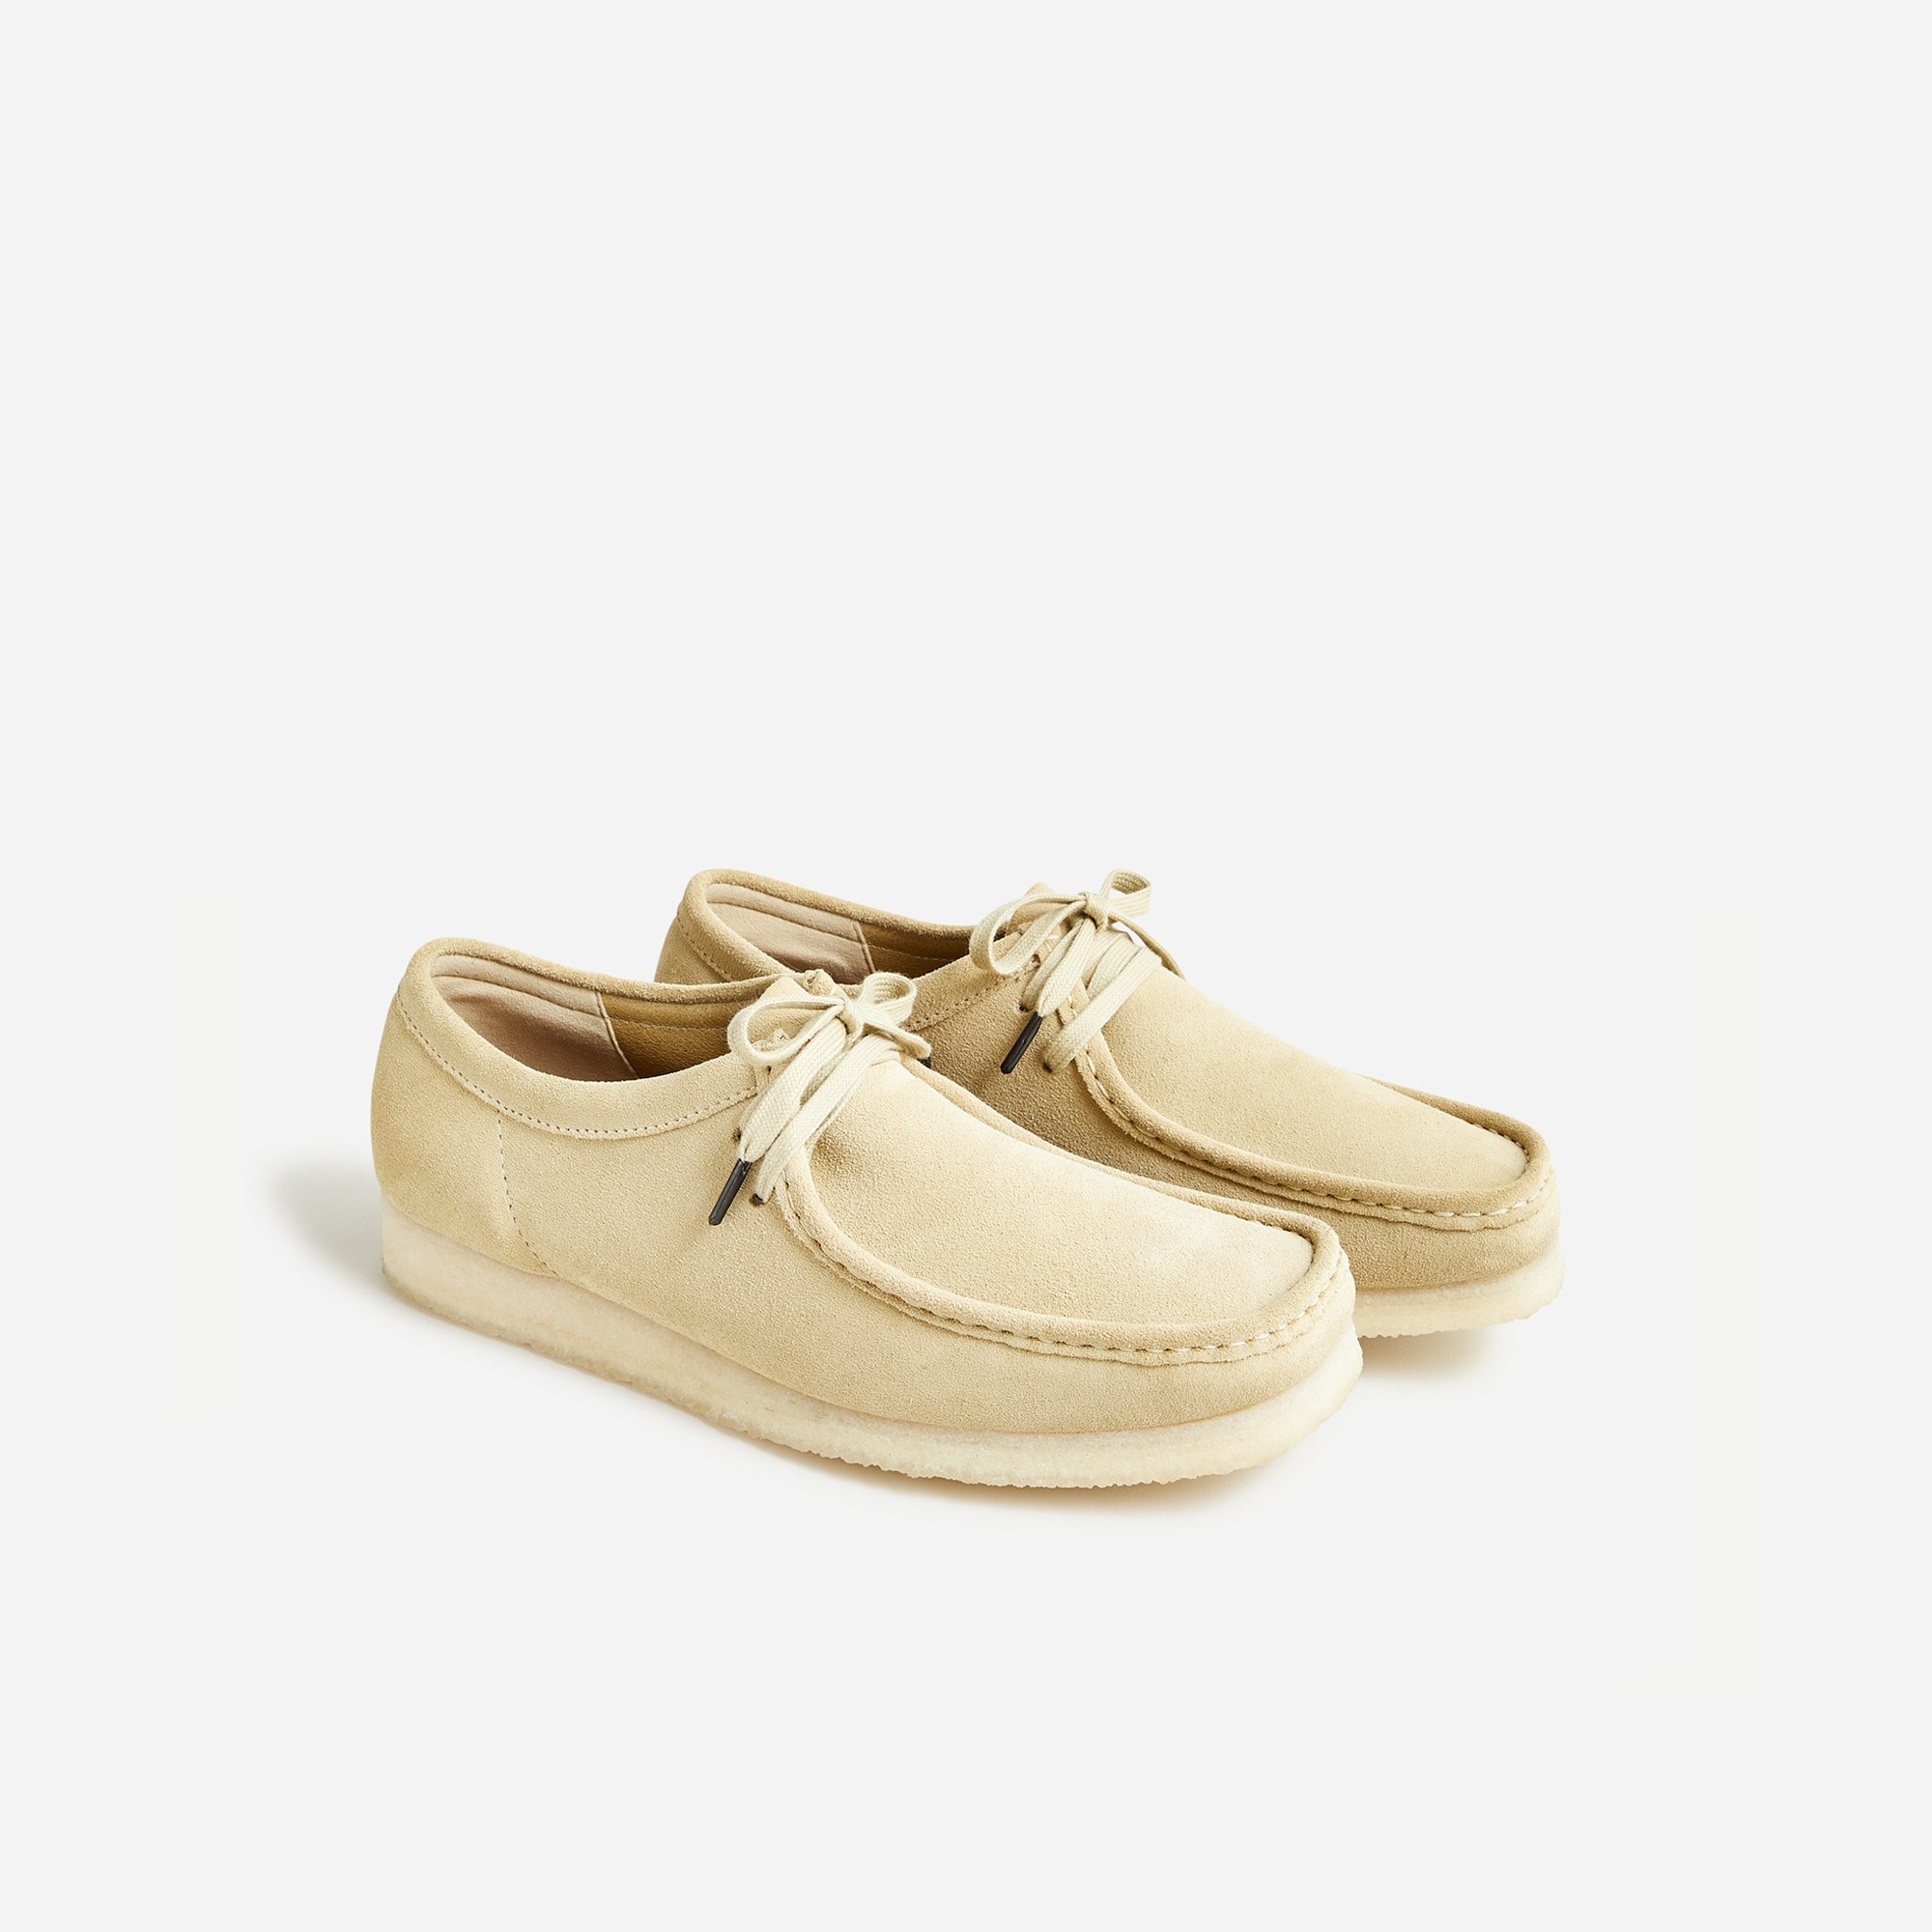 Wallabee Look Alike Shoes | lupon.gov.ph